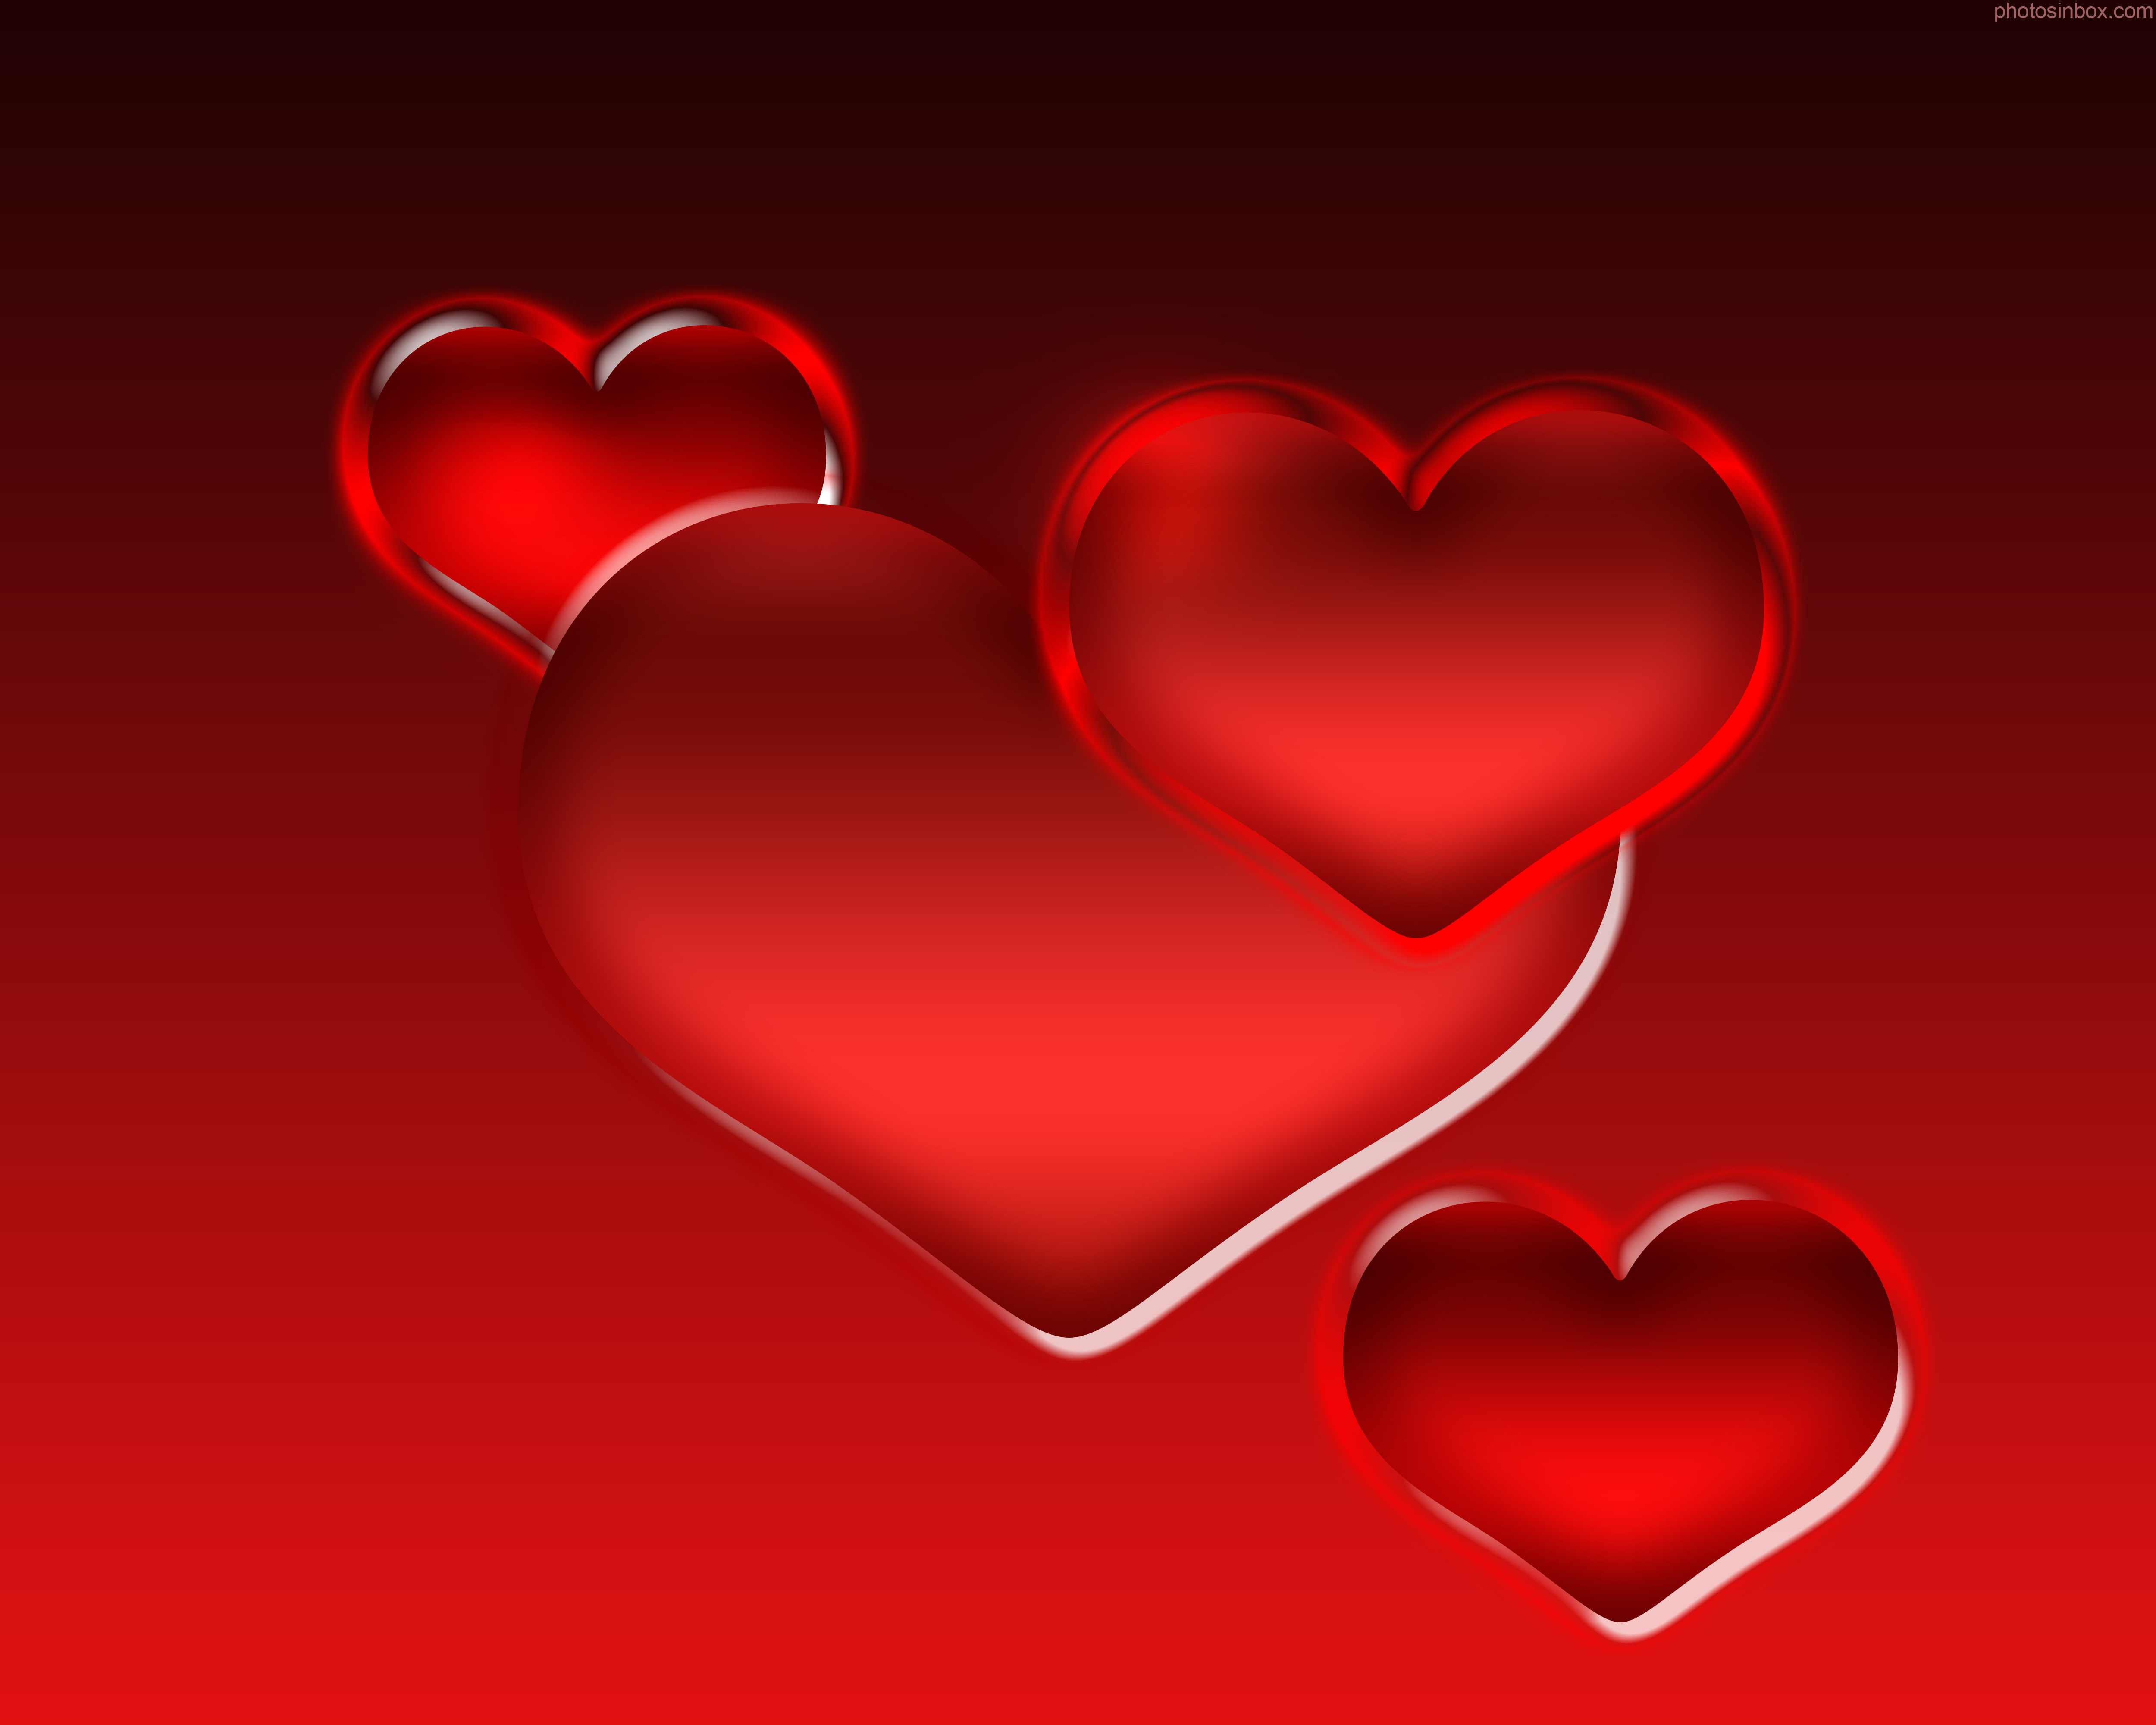 Heart Backgrounds Related Keywords amp Suggestions   Heart